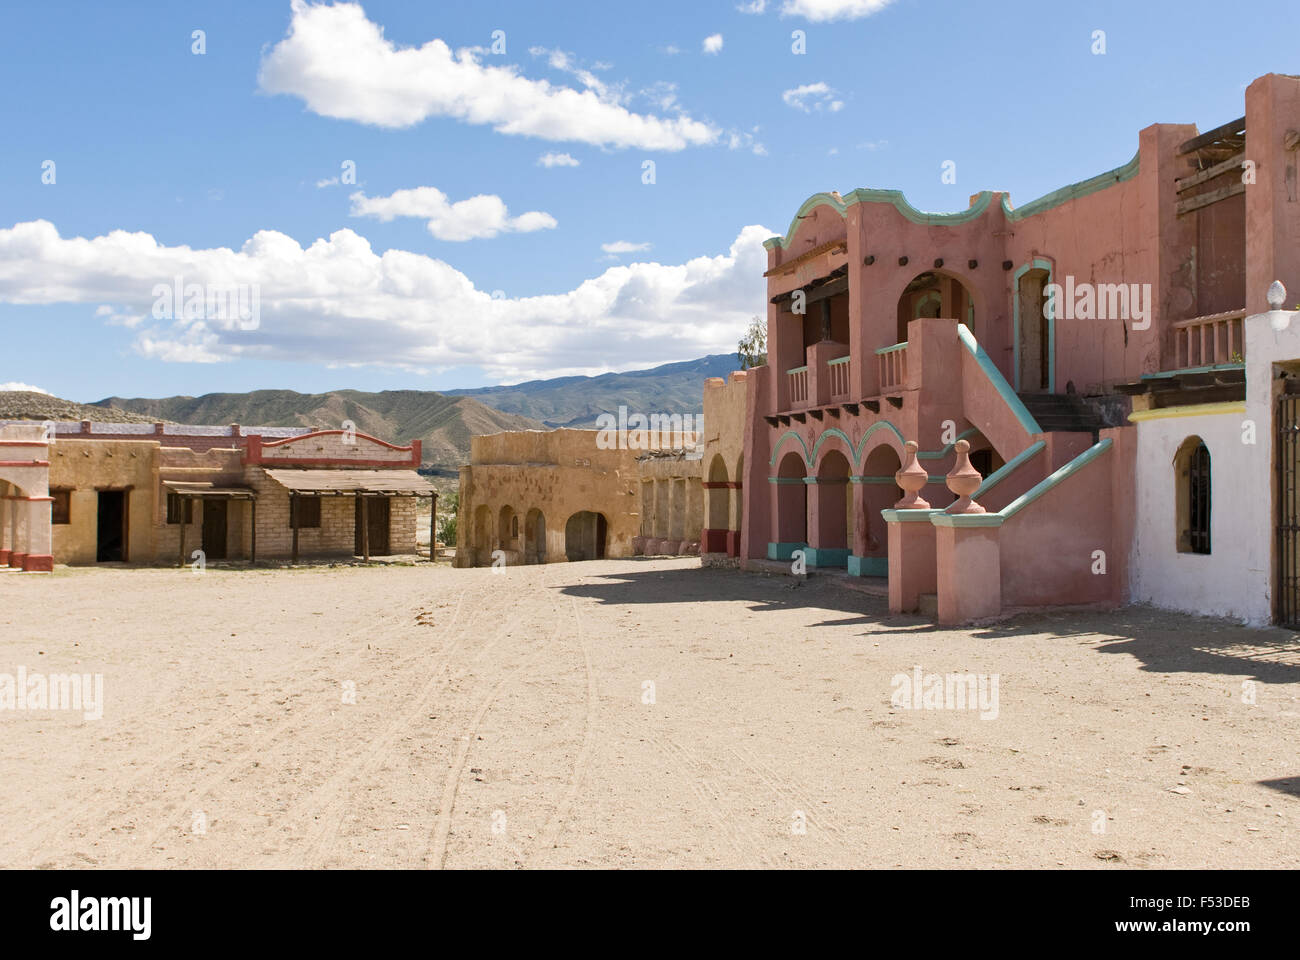 spaghetti western film sets and desert landscapes in Southern Spain, Murcia Stock Photo